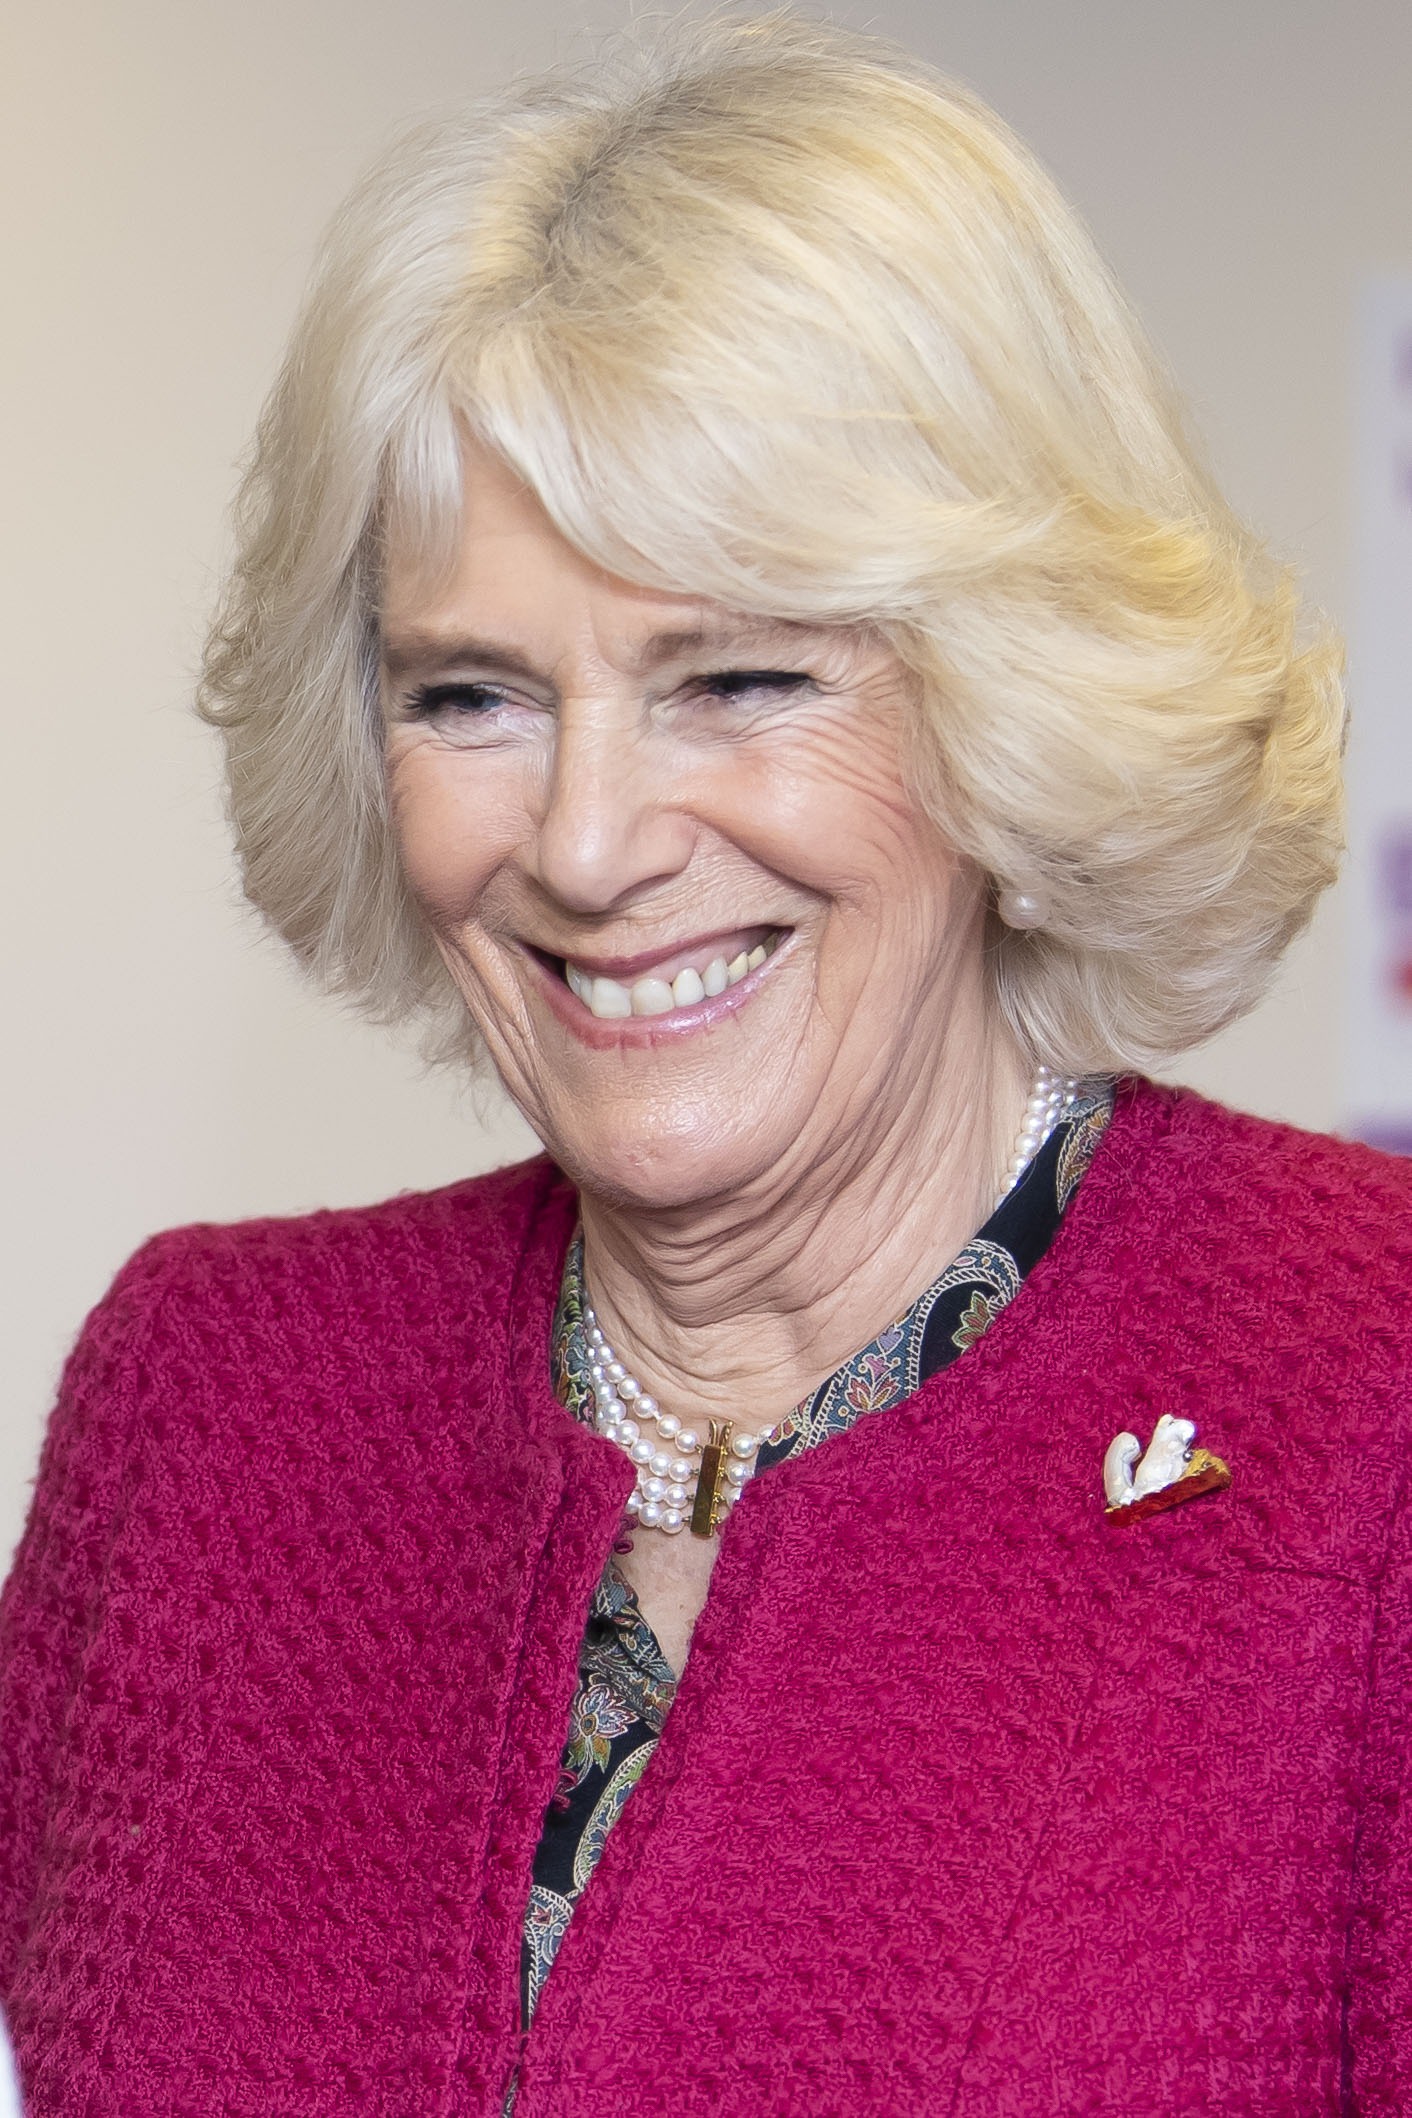  SWINDON, ENGLAND - JANUARY 24: The Duchess of Cornwall, Patron of the National Literacy Trust, smiles during a visit to the Lyndhurst Centre where she met foster carers and children on January 24, 2019 in Swindon, England. The Lyndhurst Centre is th